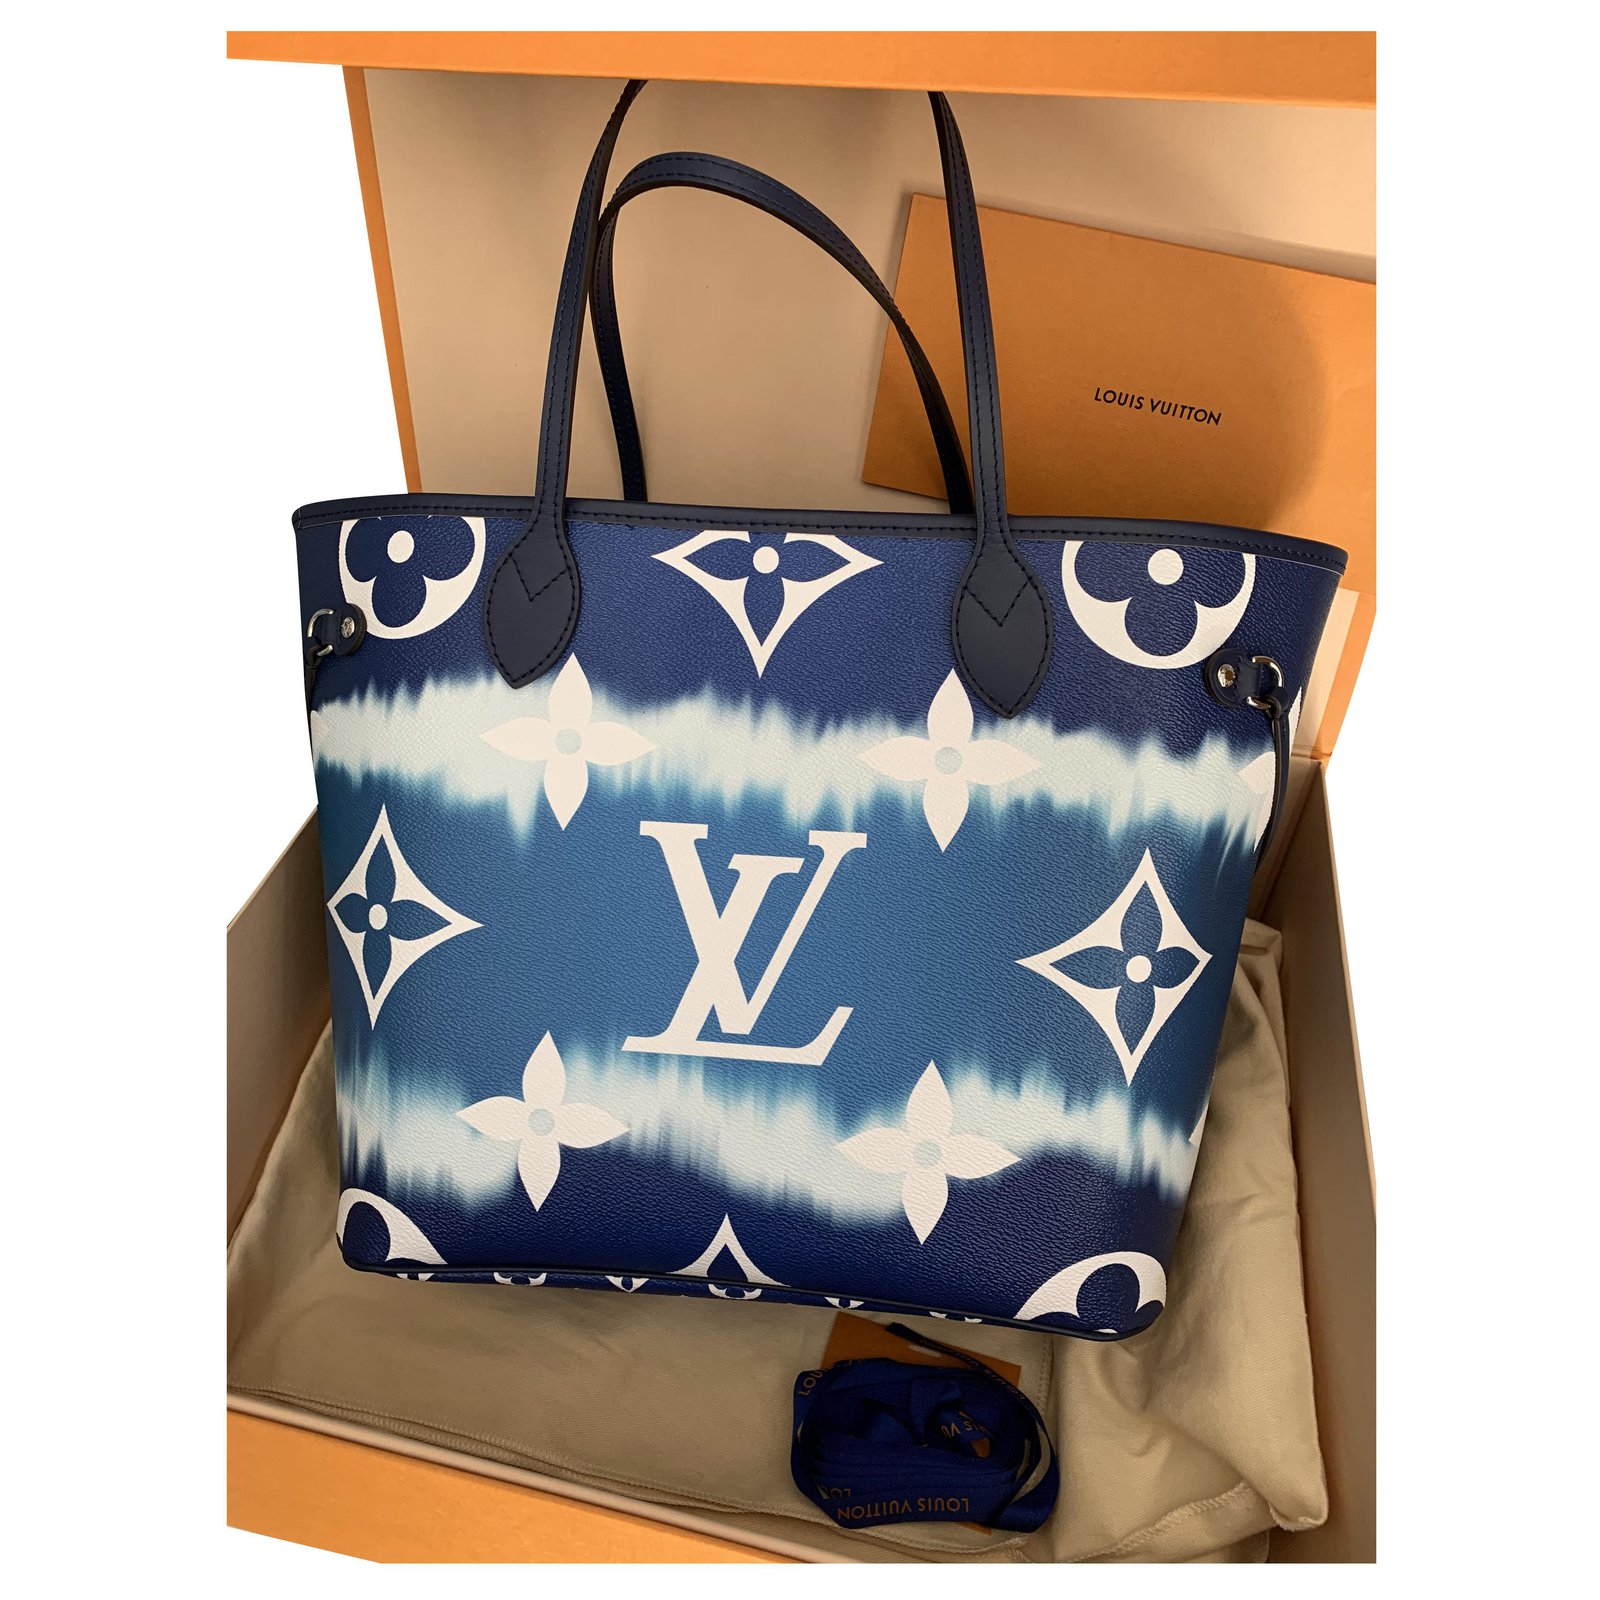 louis vuitton delightful with luggage strap - Google Search  Taschen  damen, Louis vuitton delightful mm, Louis vuitton handtaschen